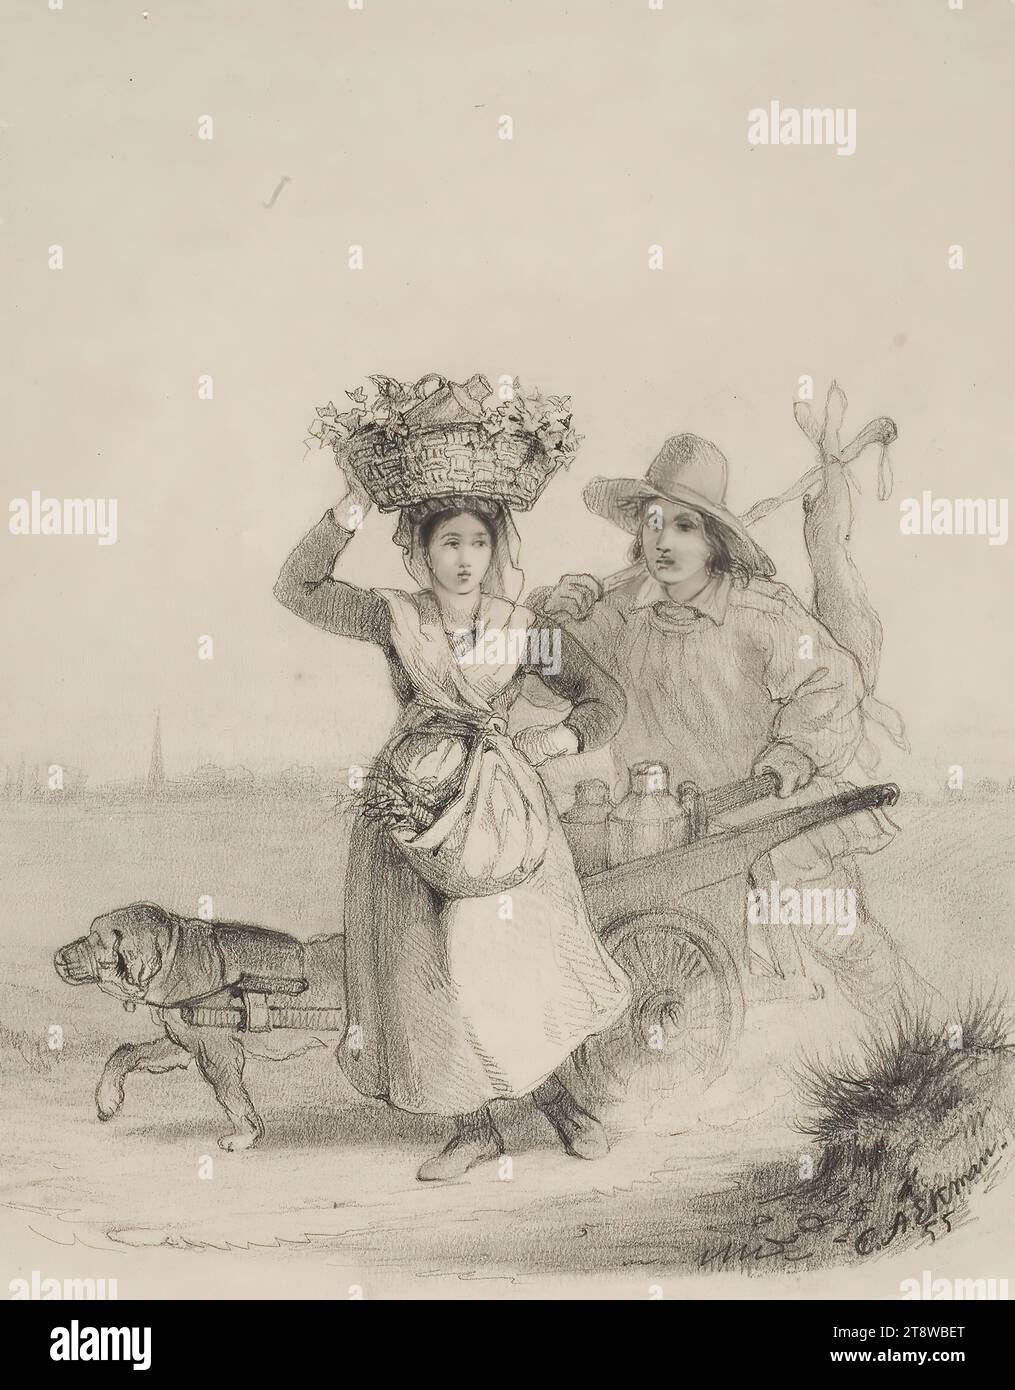 Anders Ekman, 30.3.1833, Vyborg, 1.12.1855, Düsseldorf, Germany, Peasant girl with a basket on her head and a boy with a milk cart pulled by a dog, 1855, 22.5 × 17 cm, charcoal, charcoal on paper Stock Photo